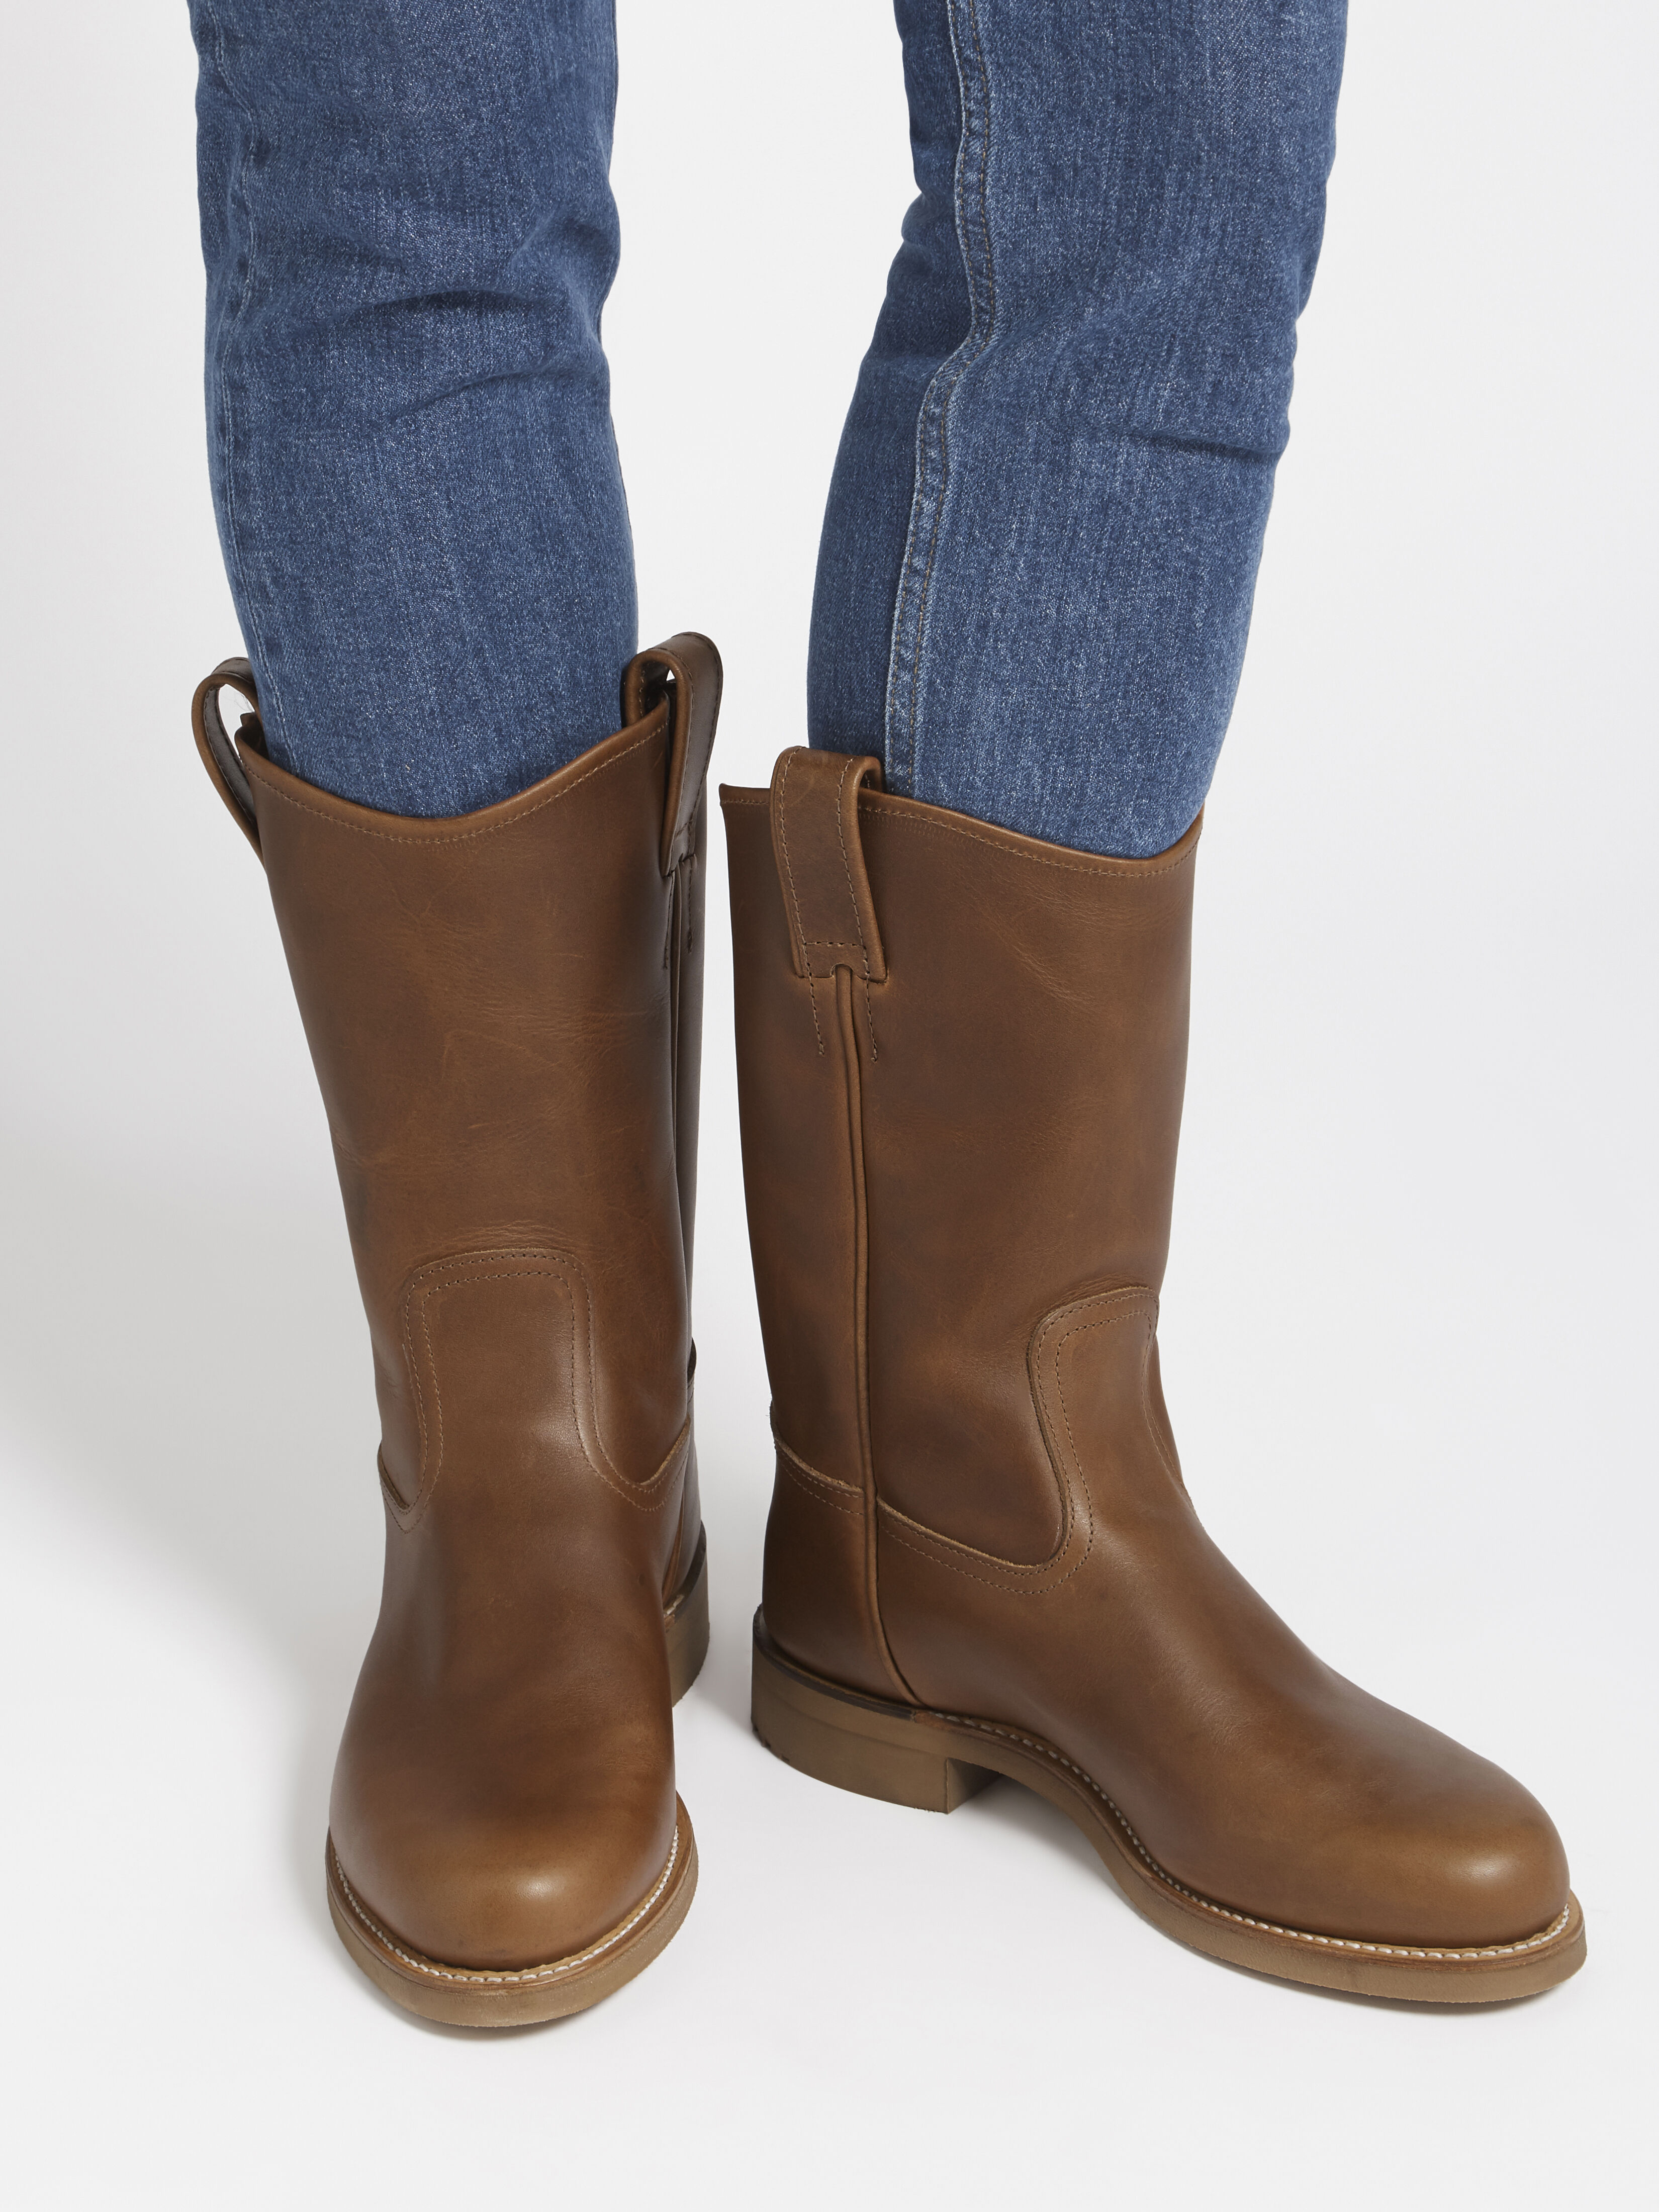 boots similar to rm williams